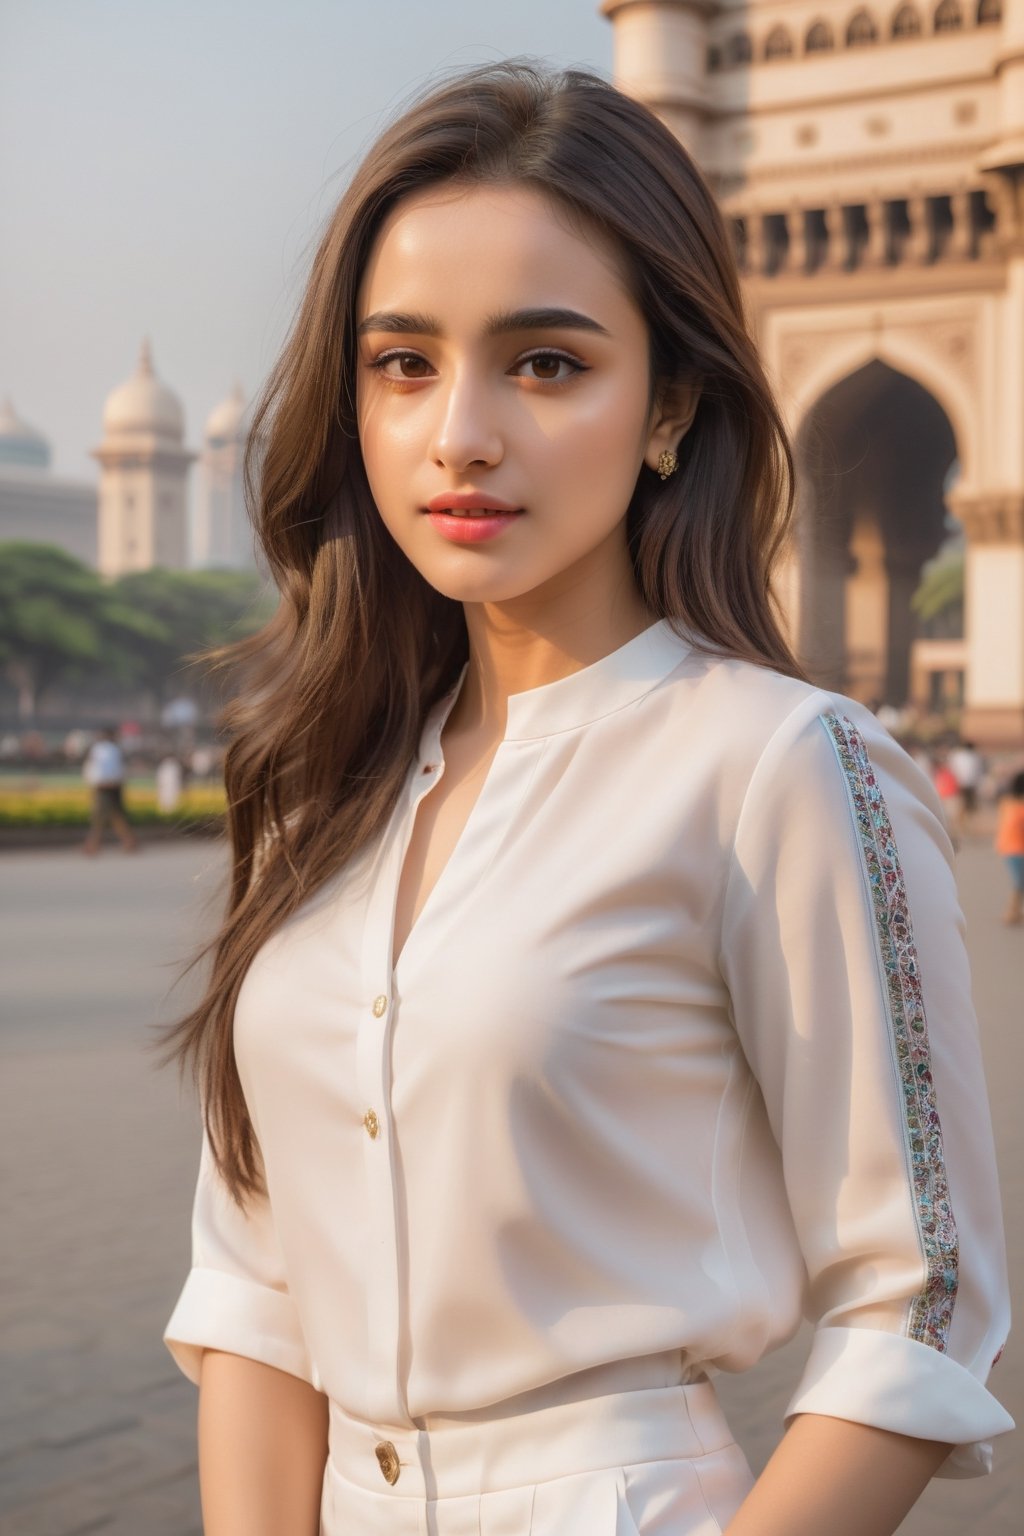 young woman face features like (shraddha kapoor),oval face ,(smaller forehead),cute, ((white skin)), having walk in mumbai in front of gateway of india wearing pants , rich detailed complex background, detail facial features, focus on skin texture, detailed hairs, natural look, cute posture, pose, hands,wearing sexy dress, candid moments, ((POV subject facing away from camera)), side shot, focus on background, Beautiful Instagram Model,dashataran,happy facial expression, professional photos, studio lighting, raw edits, full length photos, full body photos, sexy figure